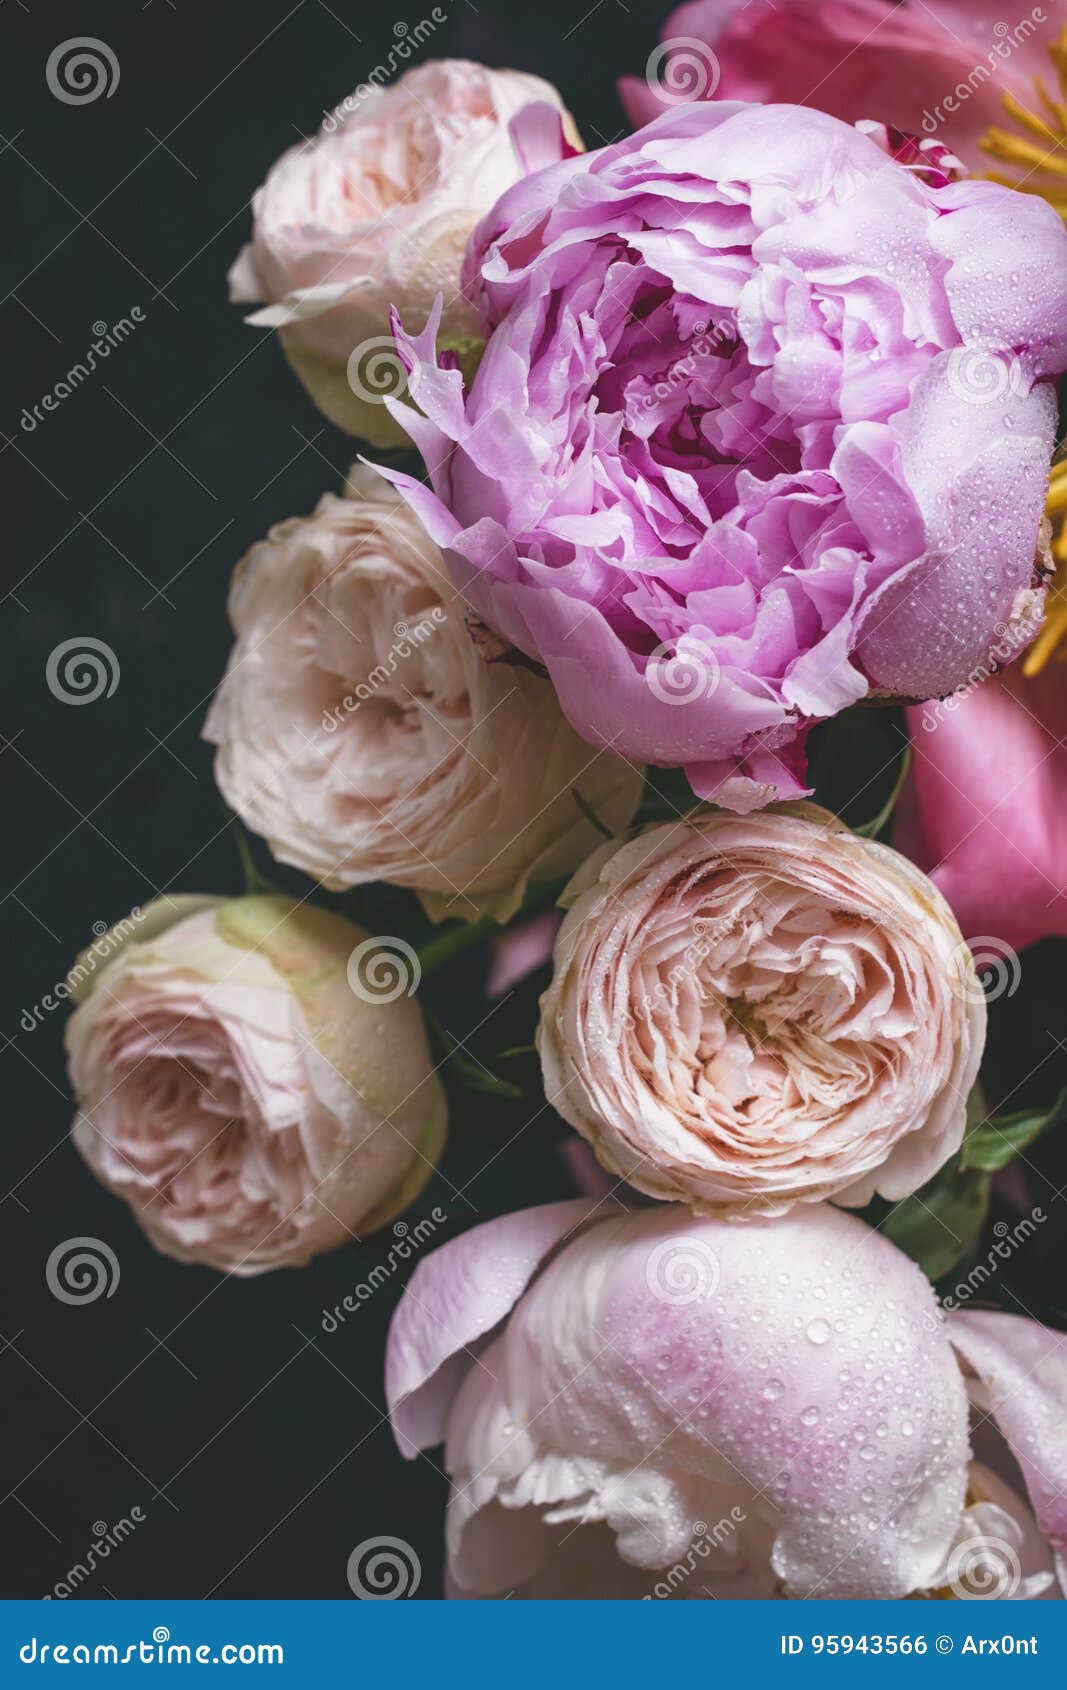 peonies and roses bouquet. shabby chic pastel bouquet